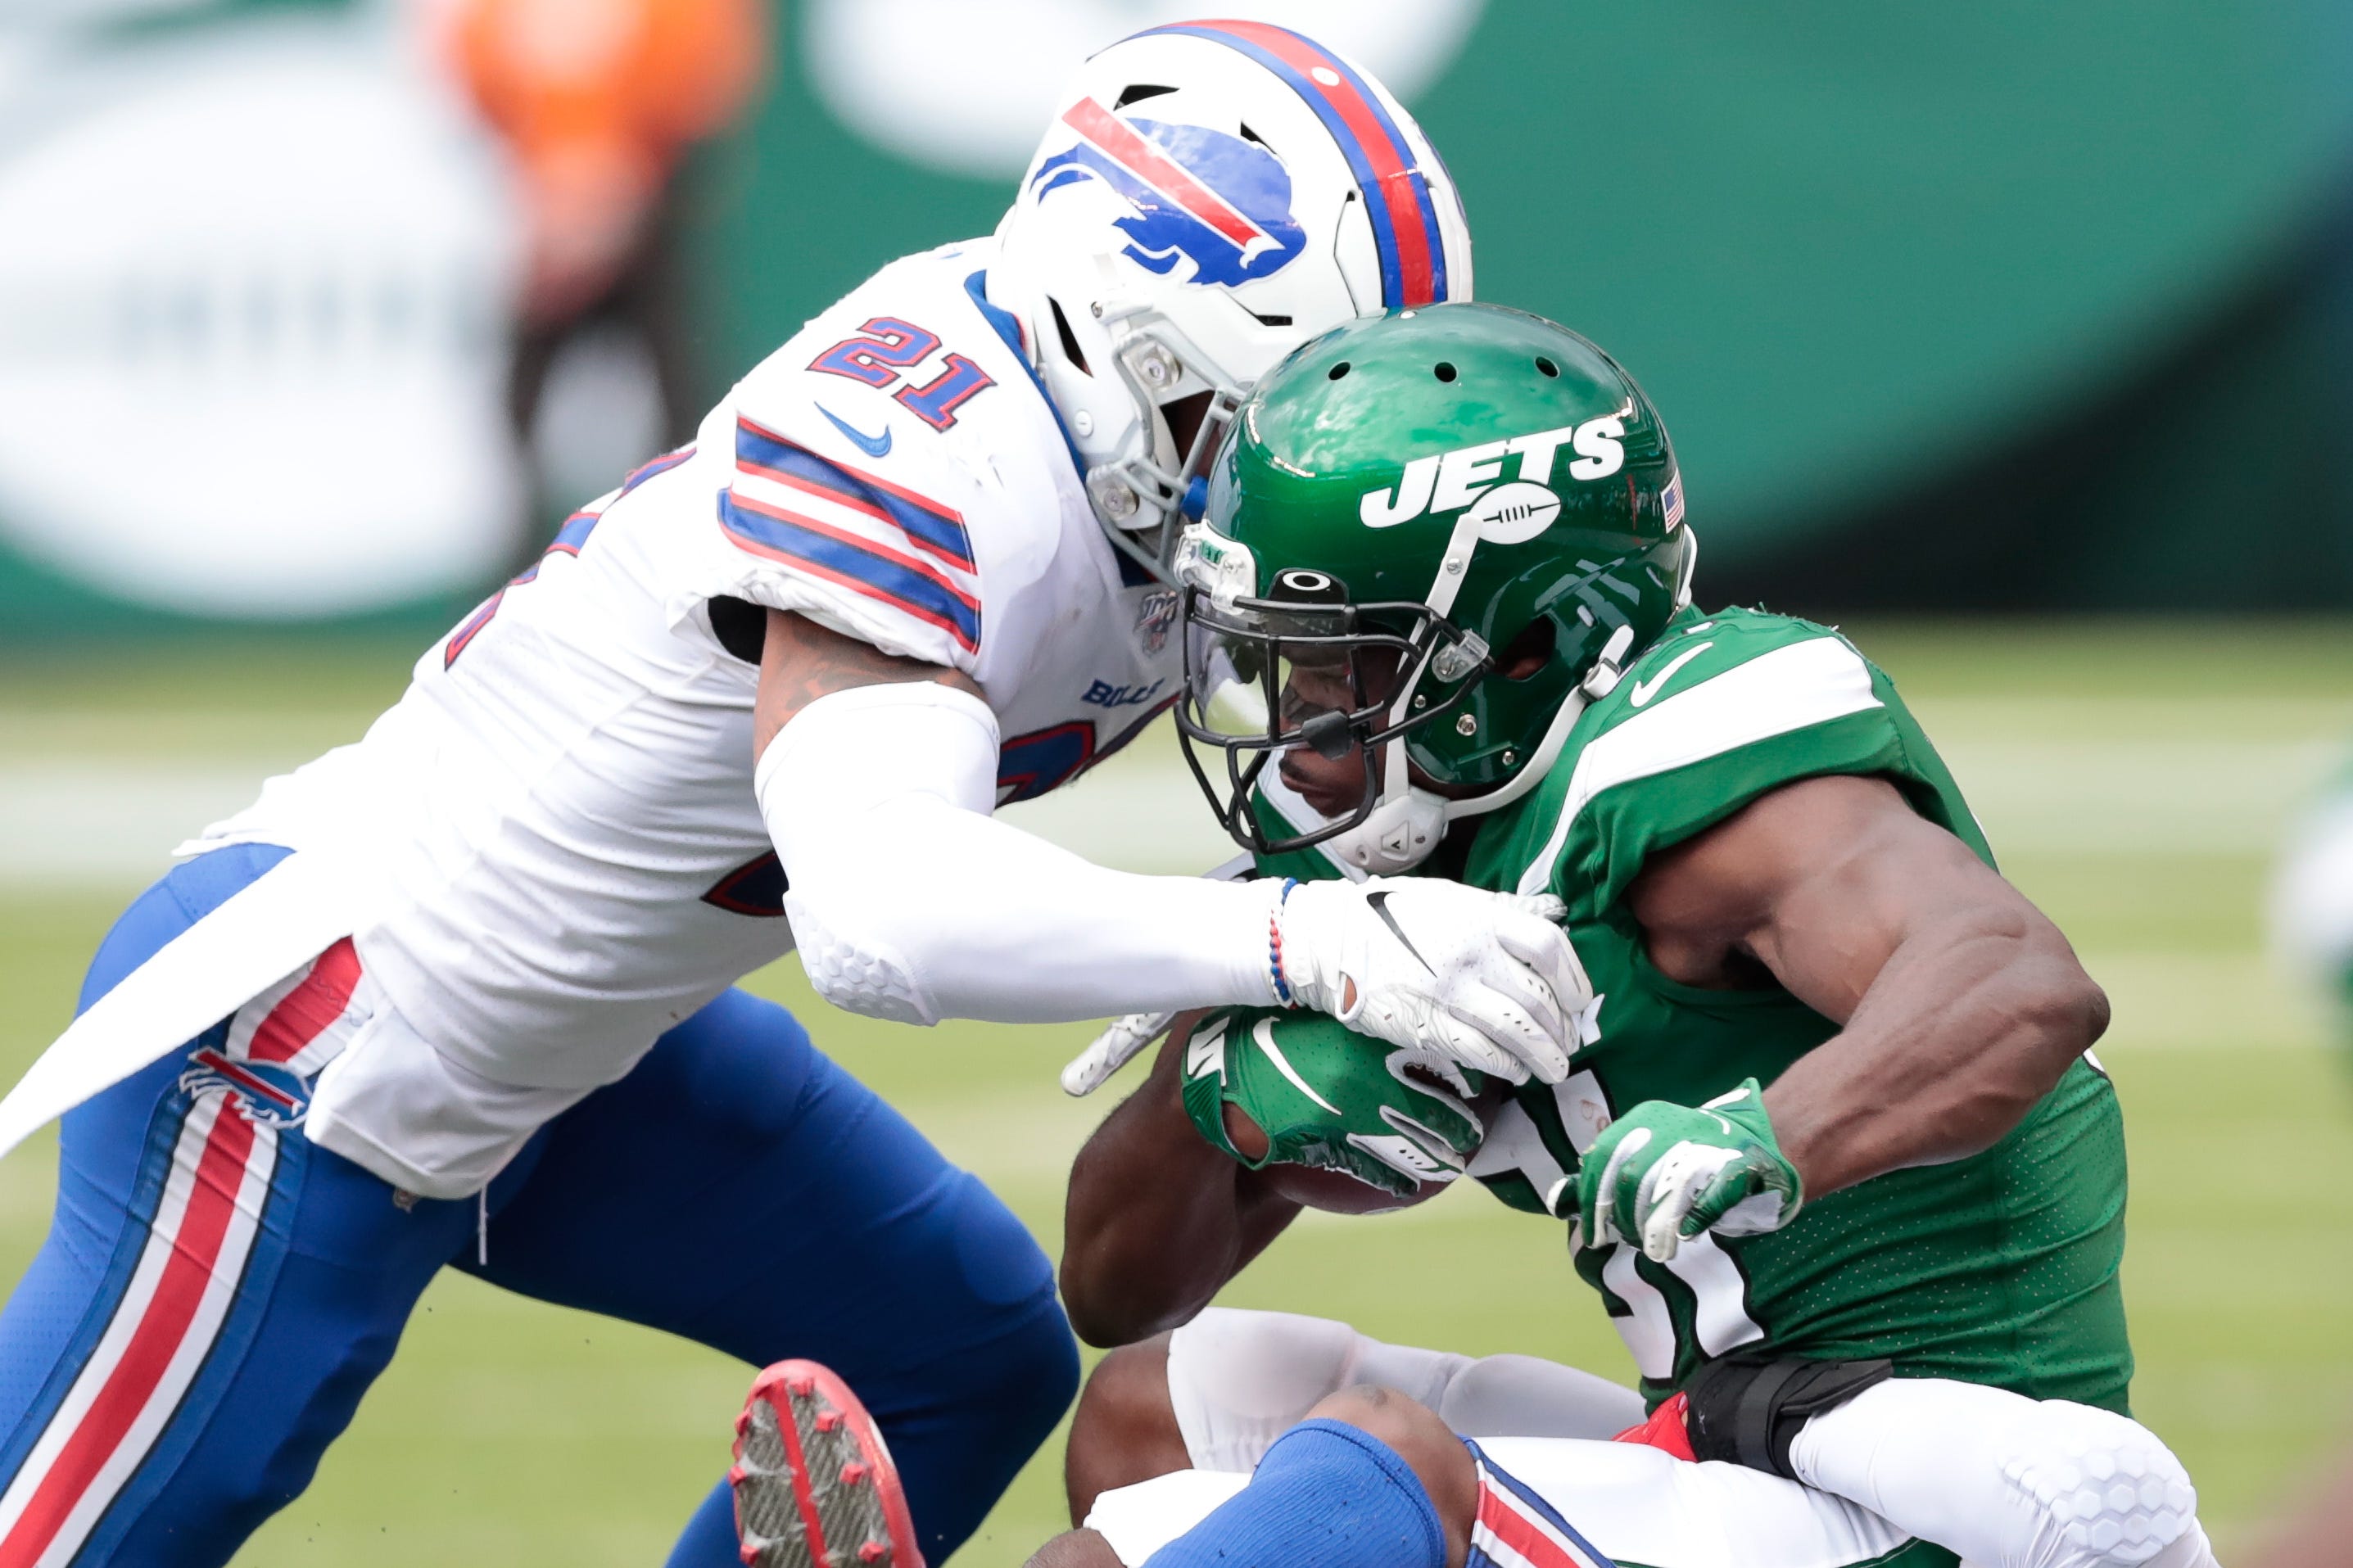 New York Jets receiver Quincy Enunwa rips team, calls fines 'excessive'